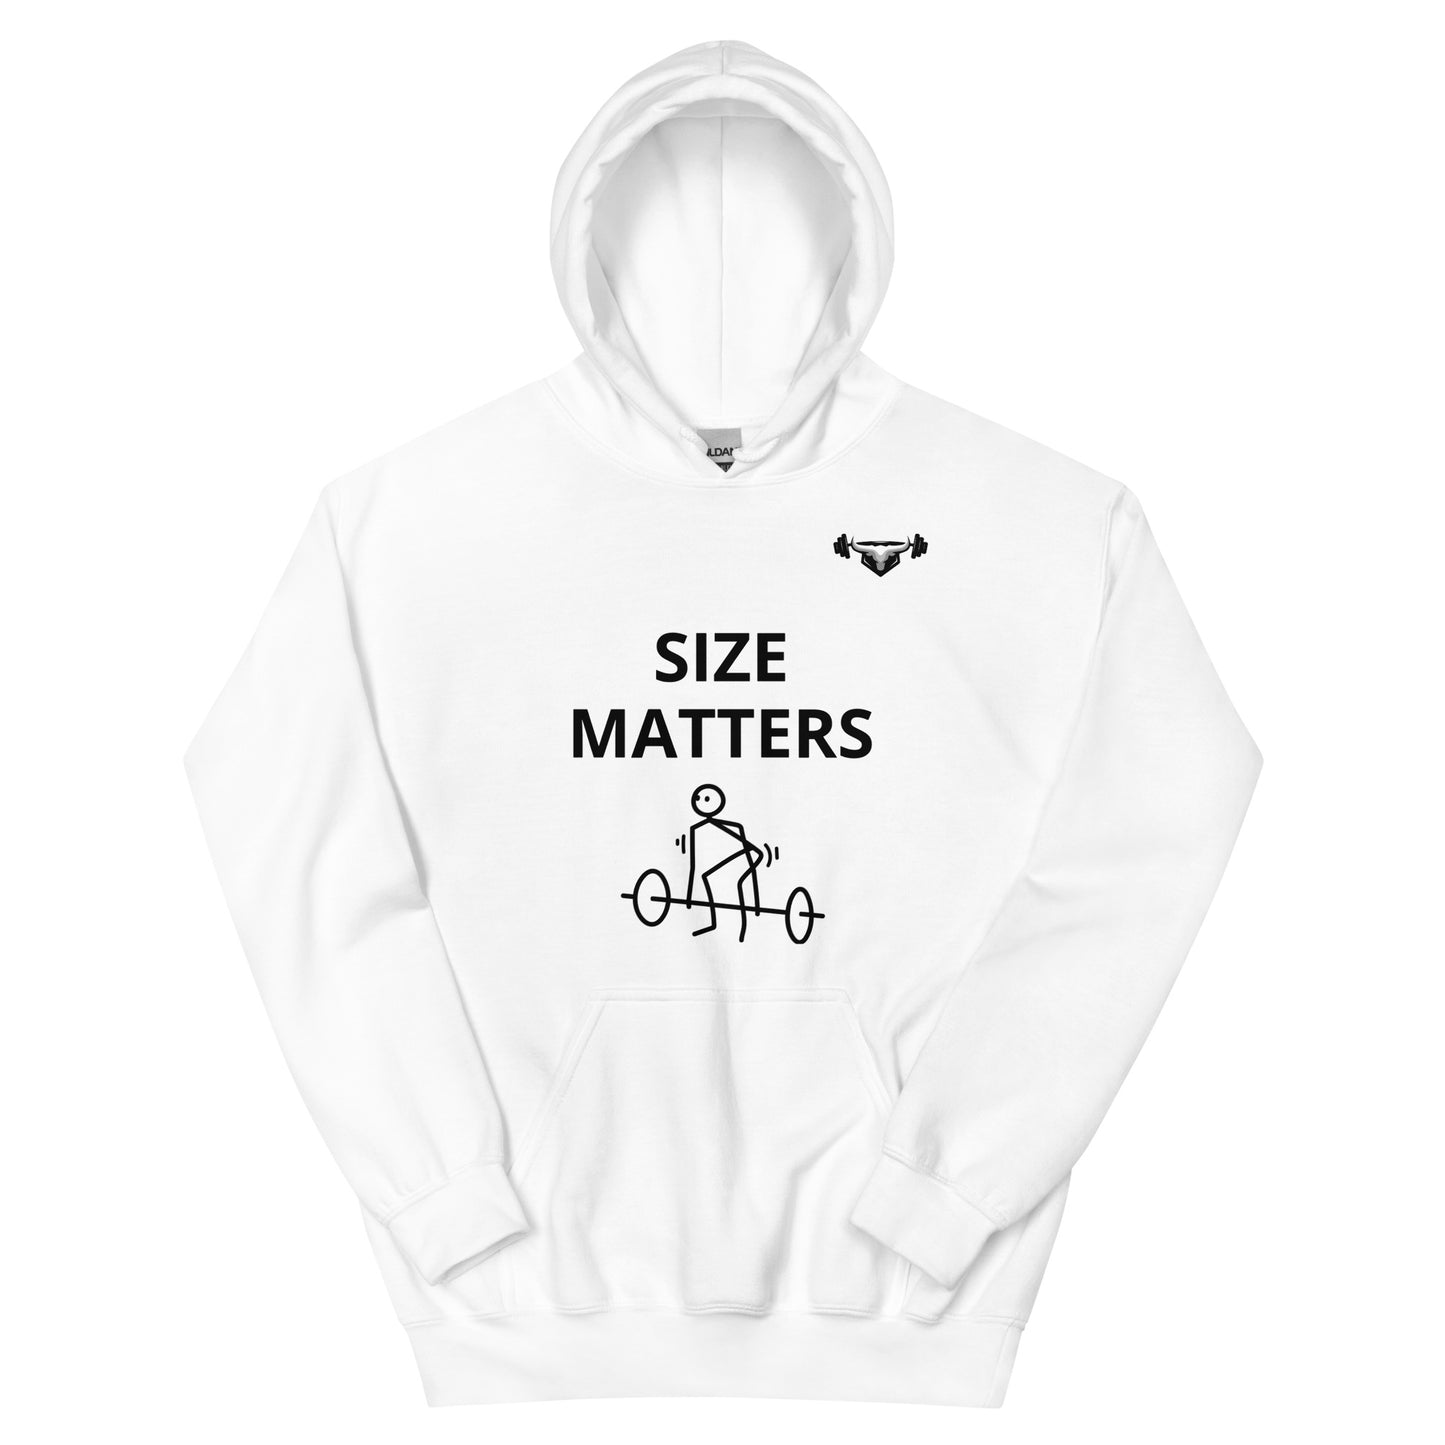 SIZE MATTERS HOODIE